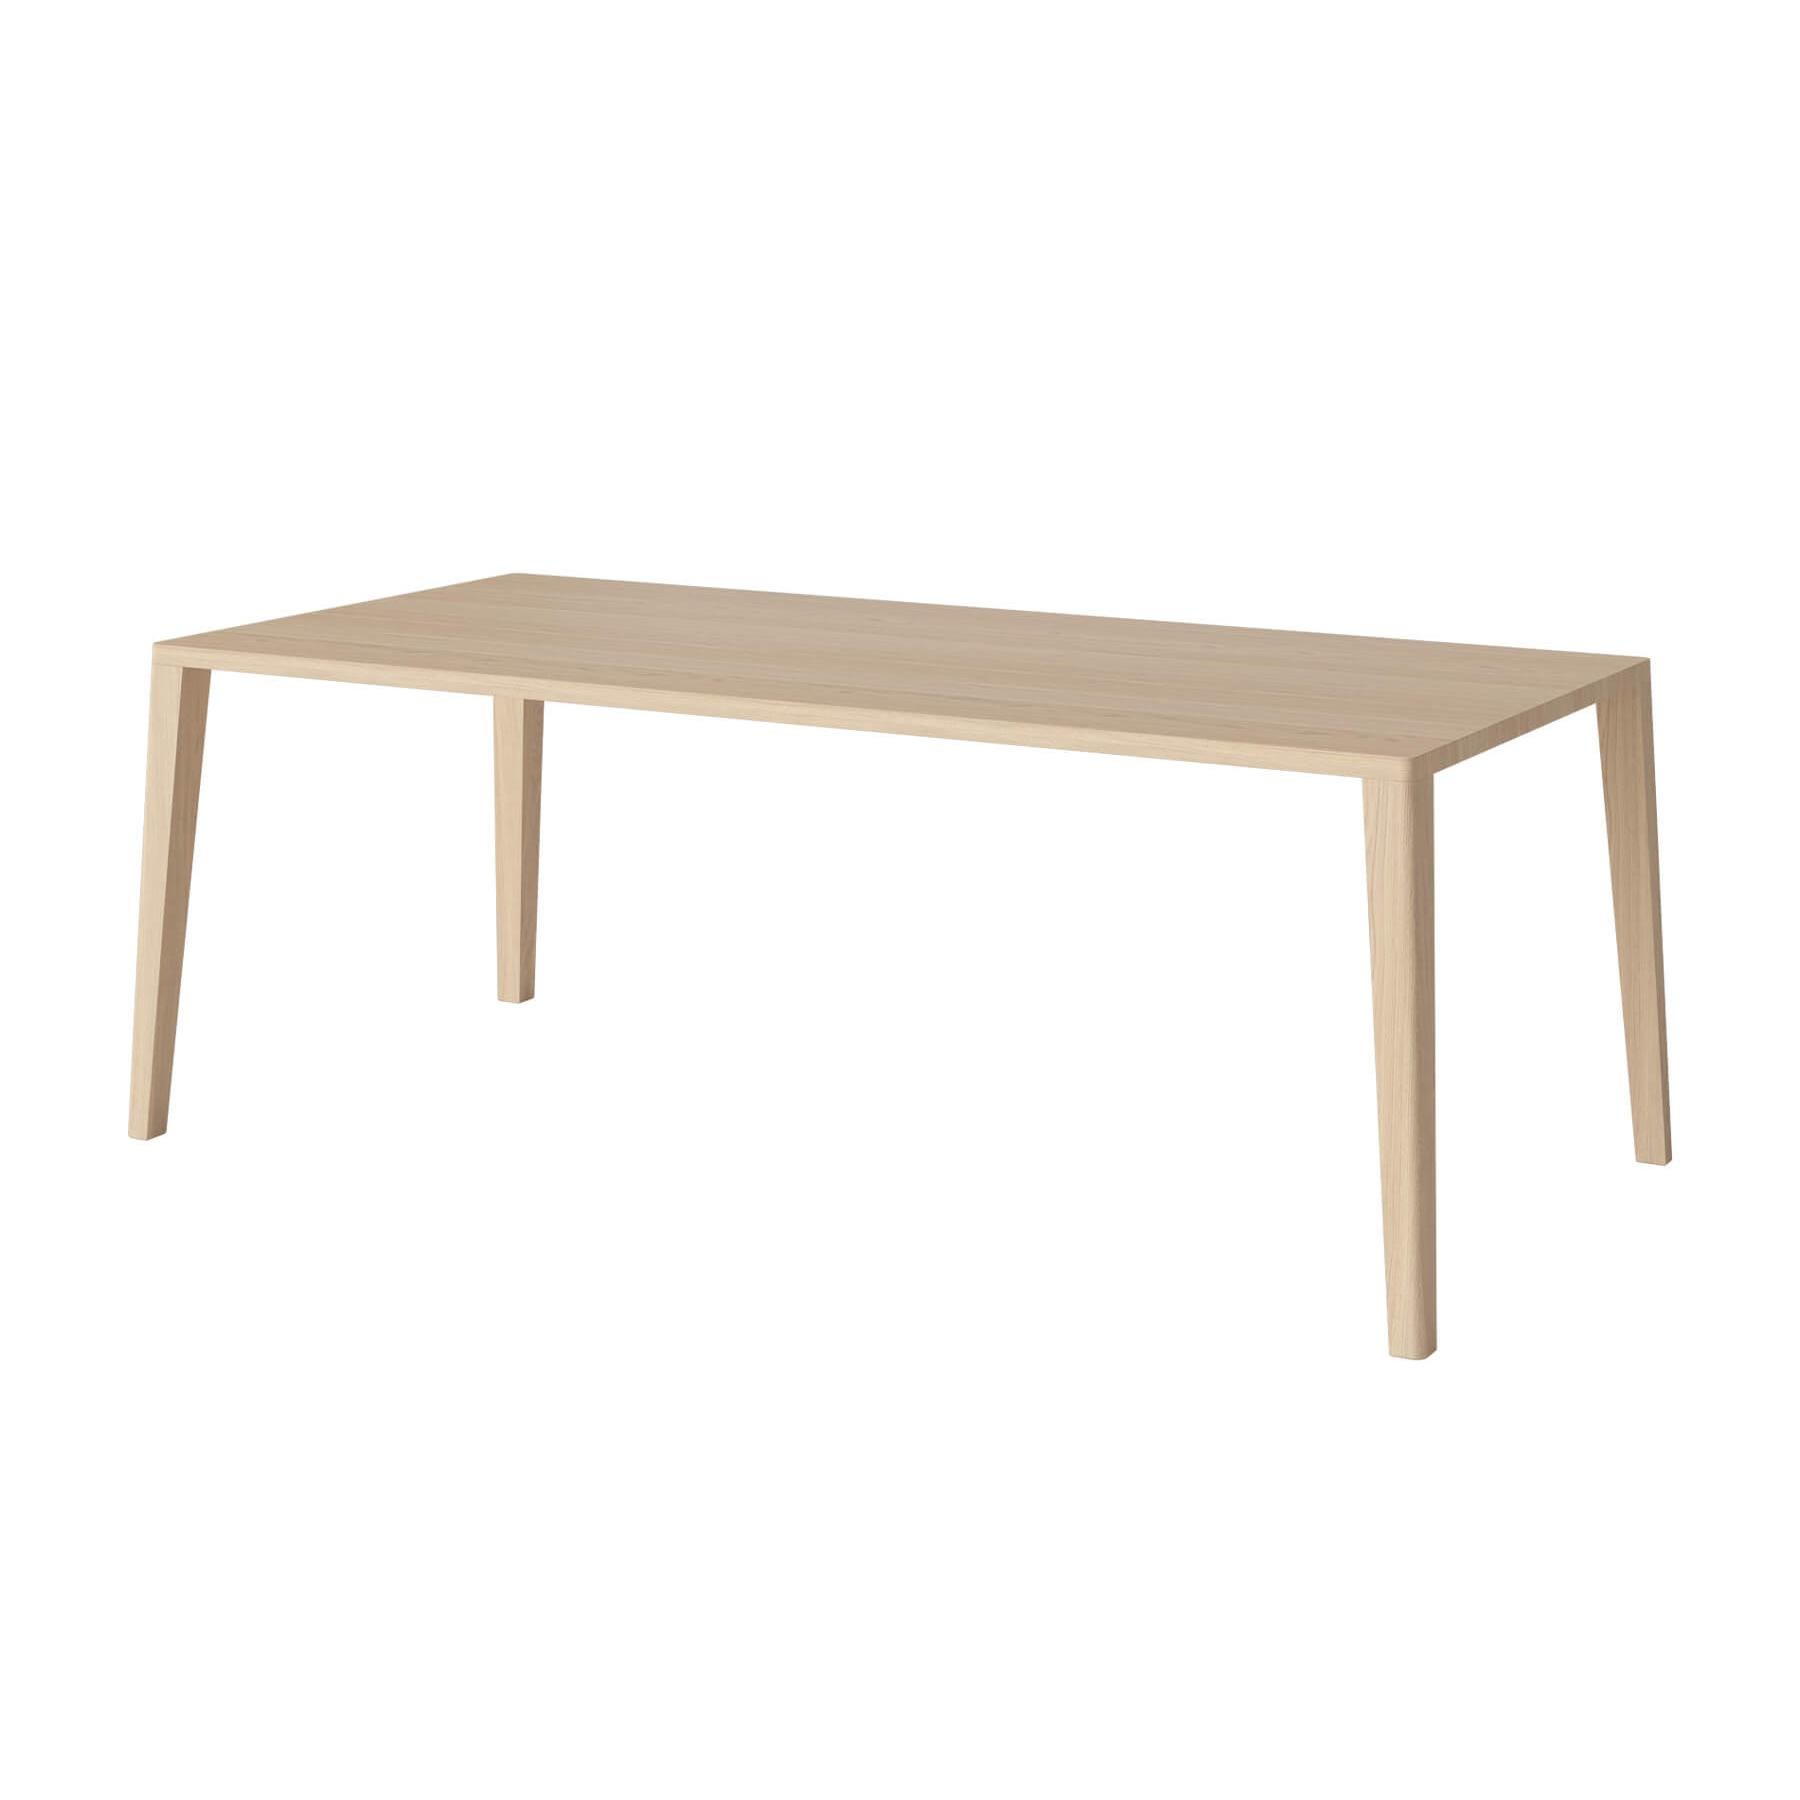 Bolia Graceful Dining Table 200 X 95cm White Oiled Legs With Extension Leaves Light Wood Designer Furniture From Holloways Of Ludlow